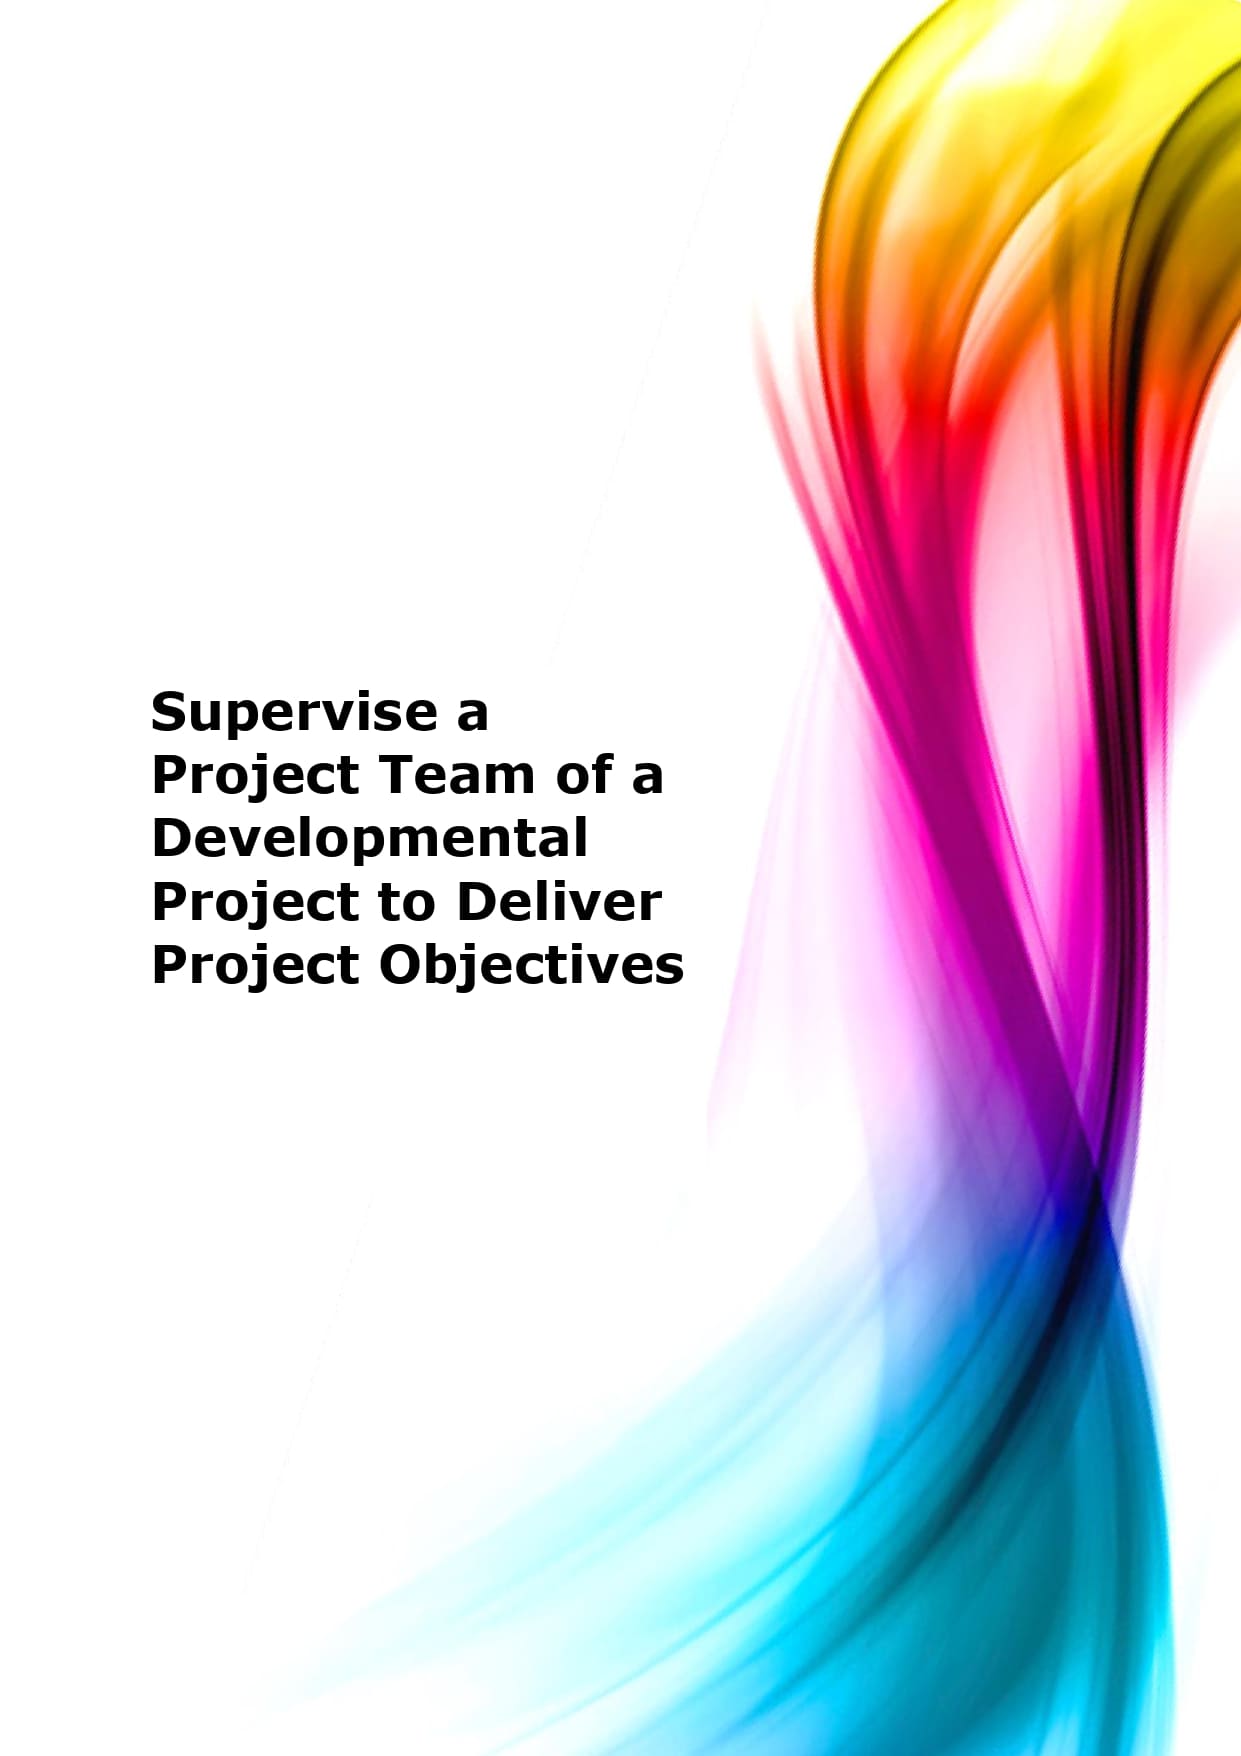 Supervise a project team of a developmental project to deliver project objectives